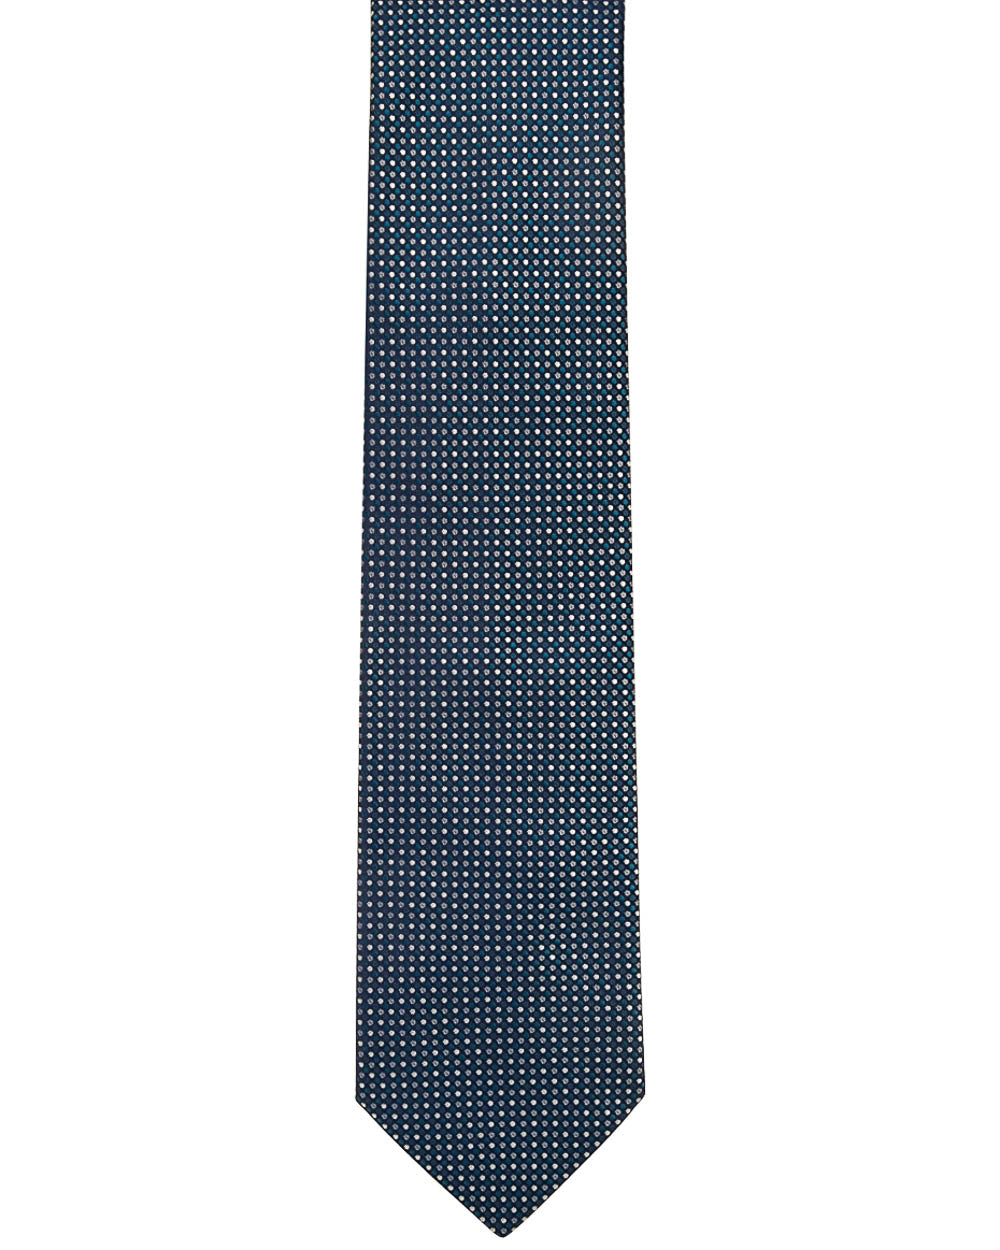 Navy and Teal Dotted Tie